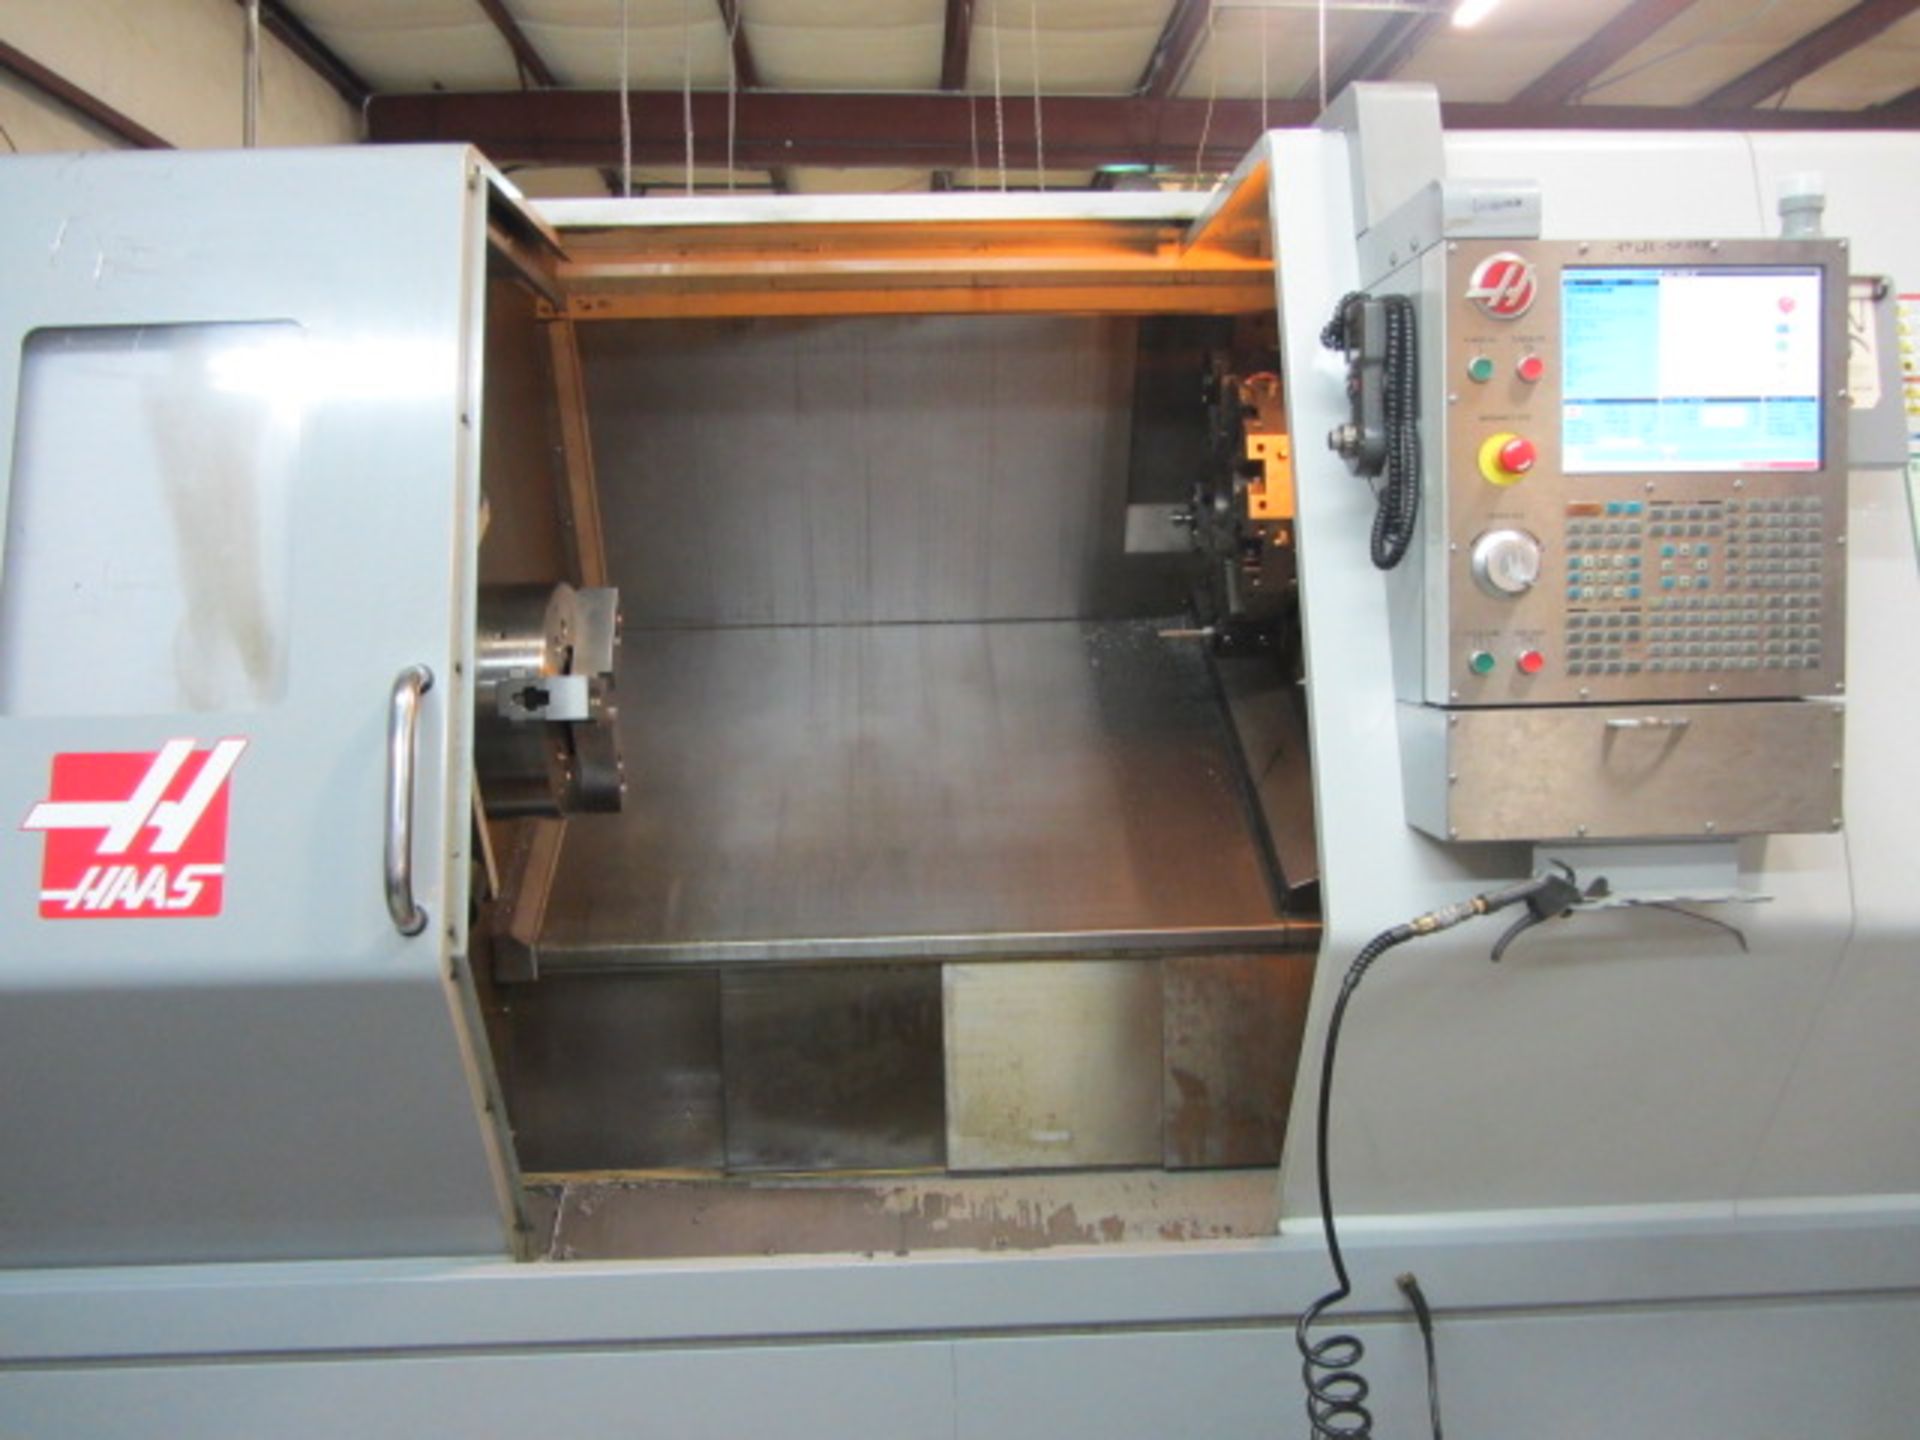 Haas SL40 CNC Turning Center with 15'' 3-Jaw Power Chuck, 4-1/2'' Bore, Approx 70'' Max Distance - Image 4 of 10